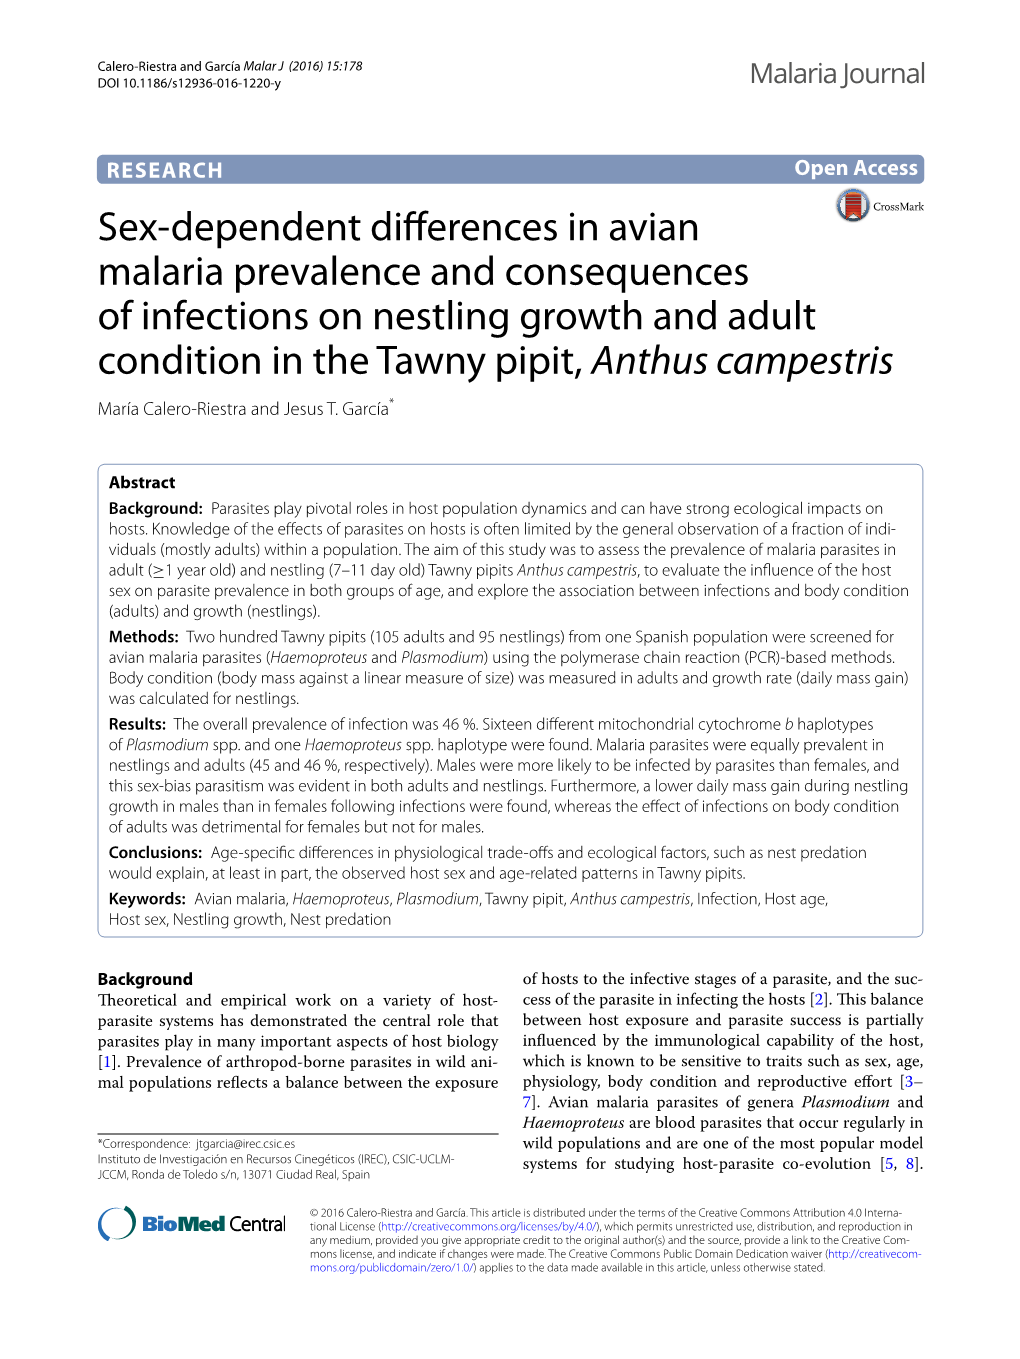 Sex-Dependent Differences in Avian Malaria Prevalence And